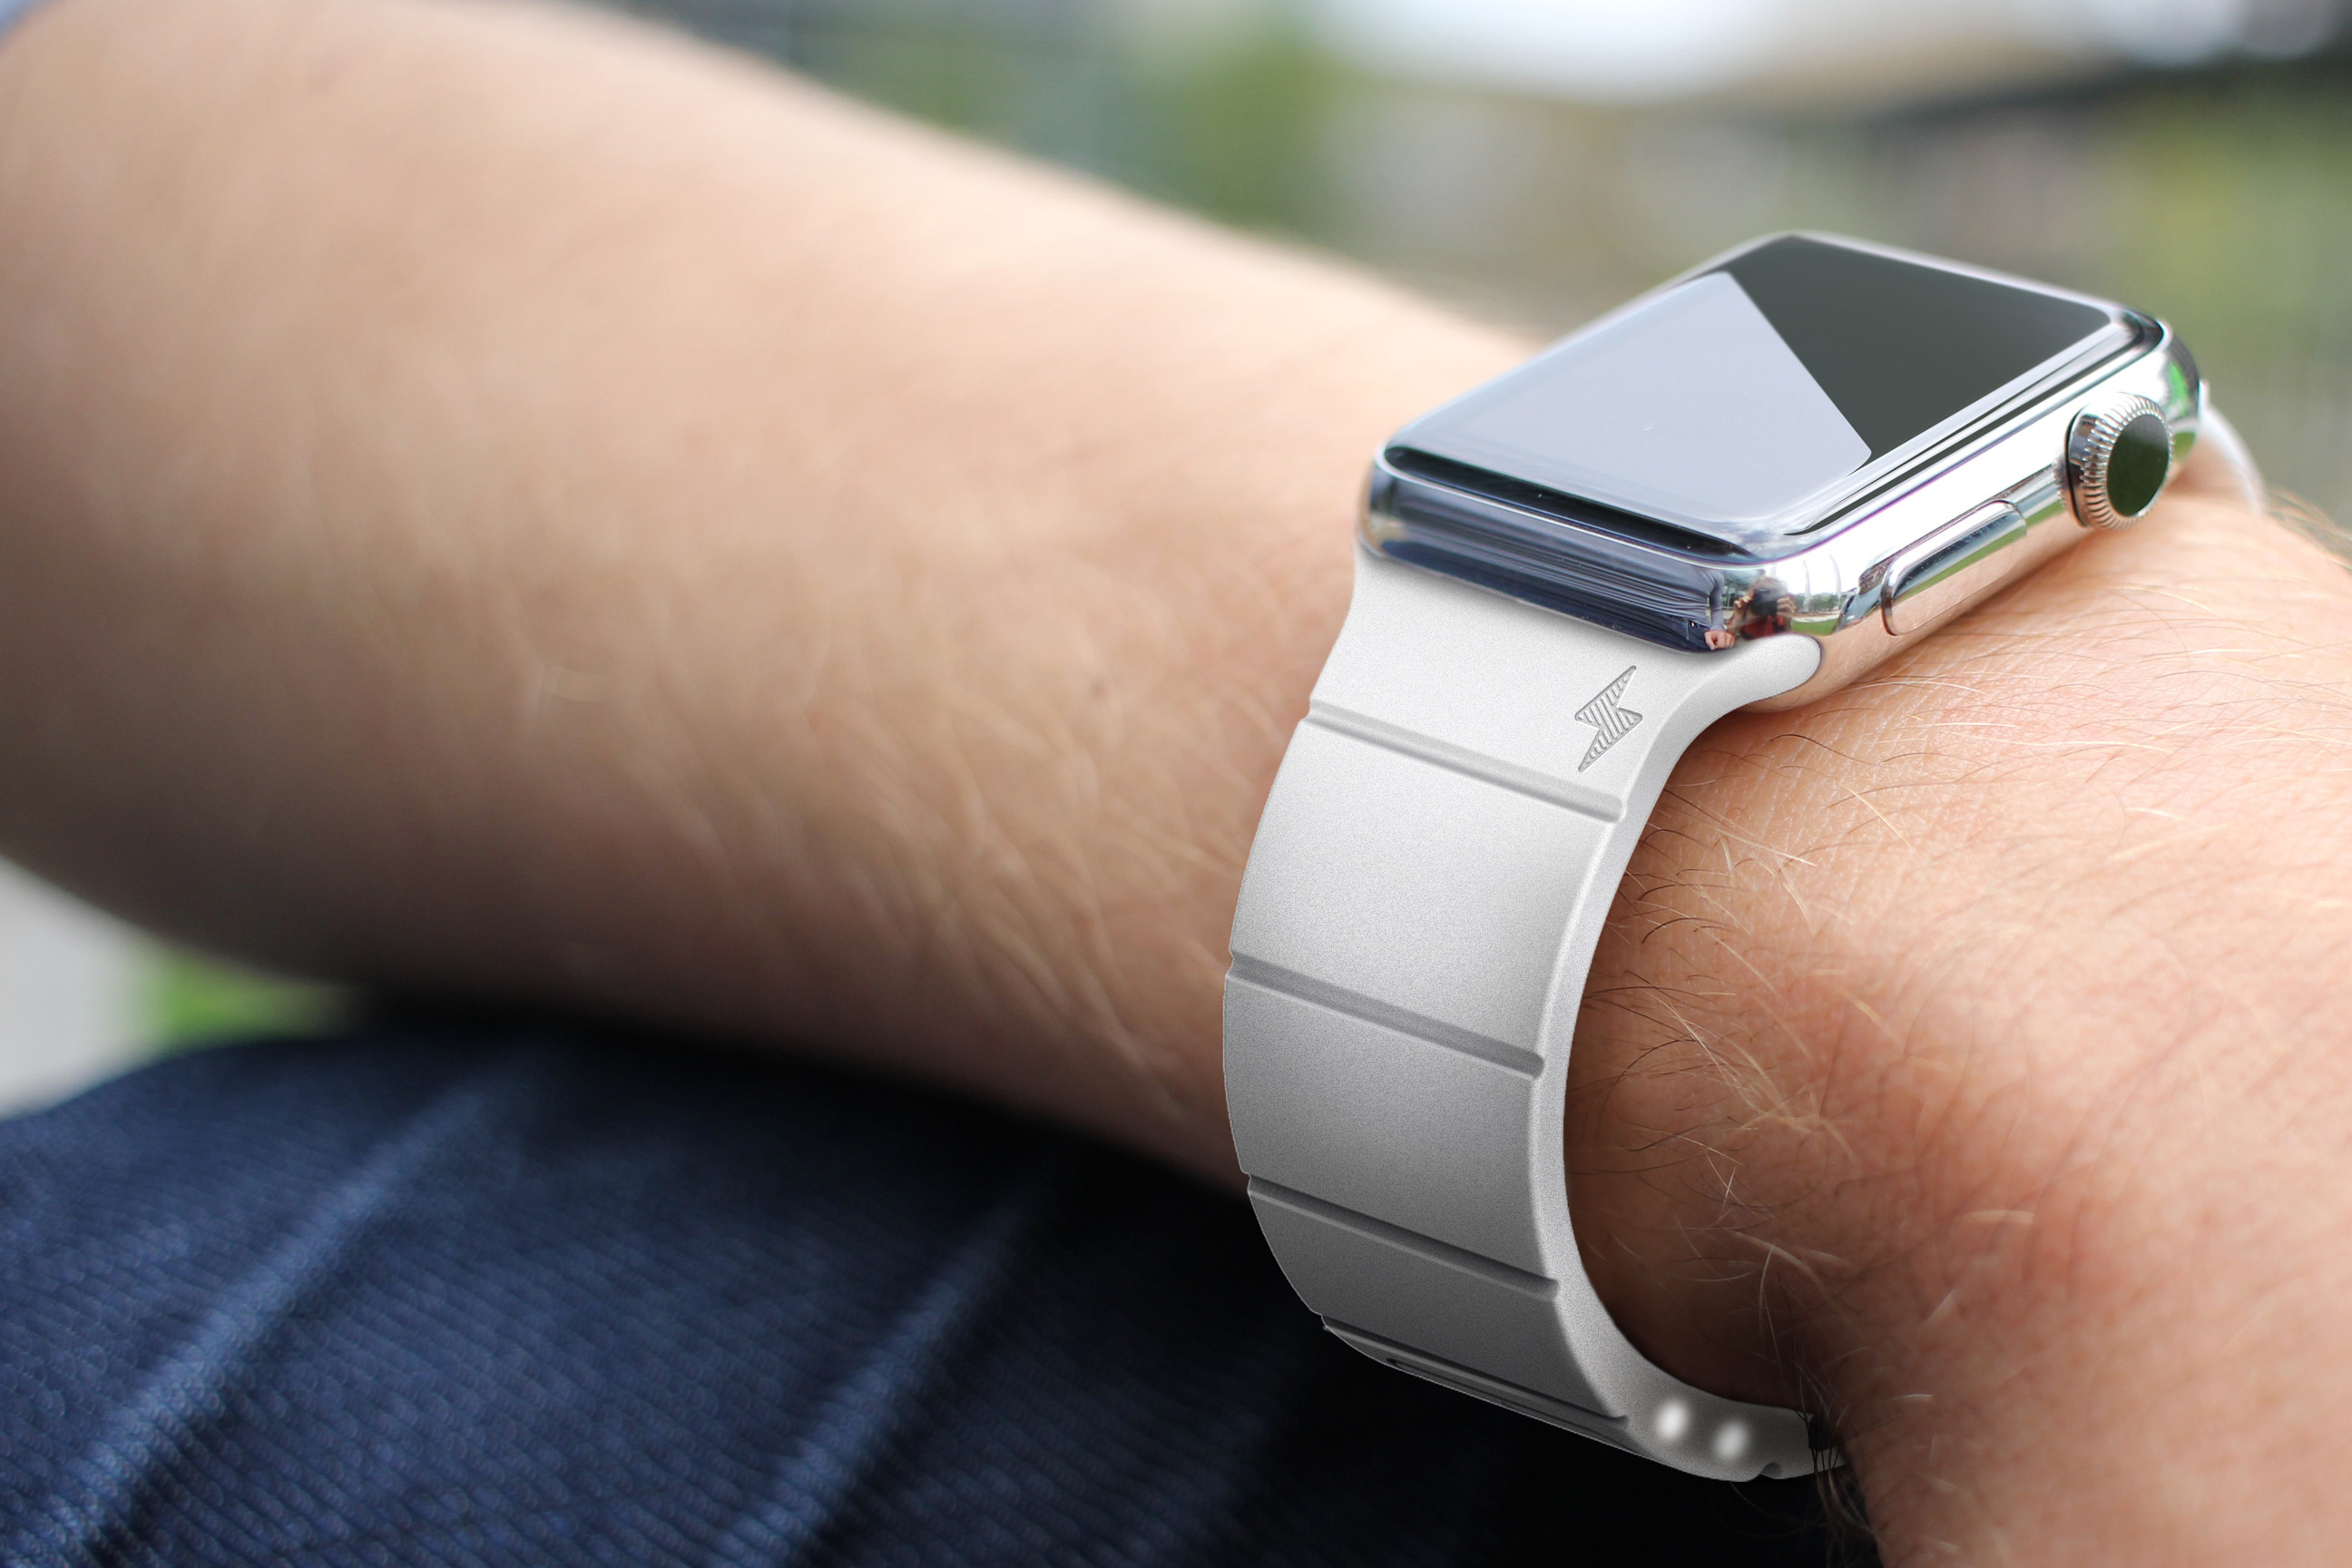 Reserve Strap' Suspends Shipments Due to Apple Watch Accessory Port Policy Change